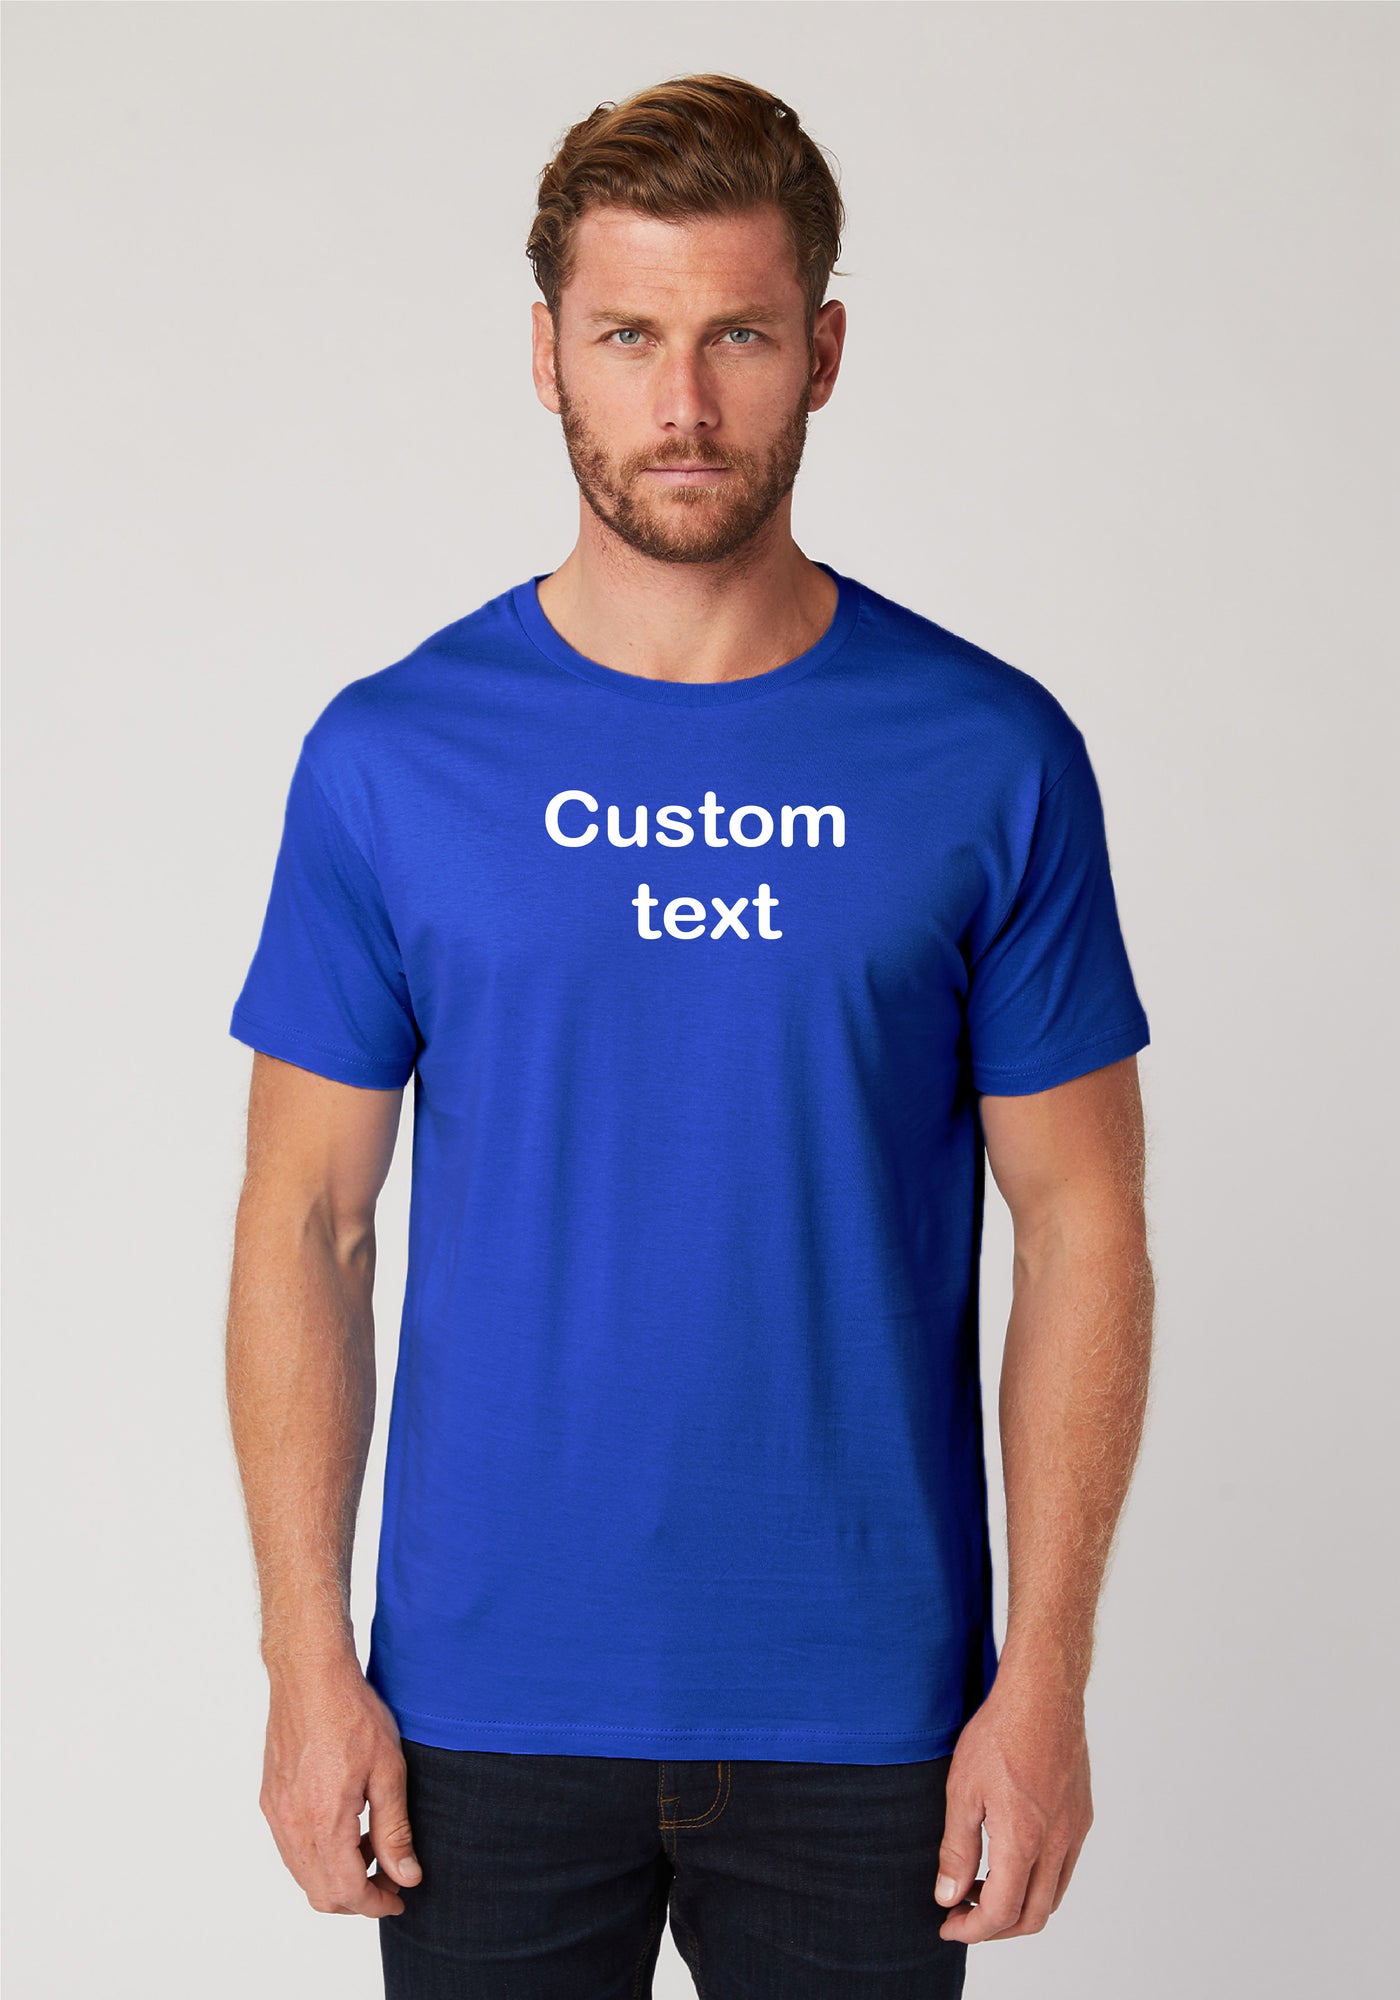 Unisex Short Sleeve T-shirt with Personalized Custom Text